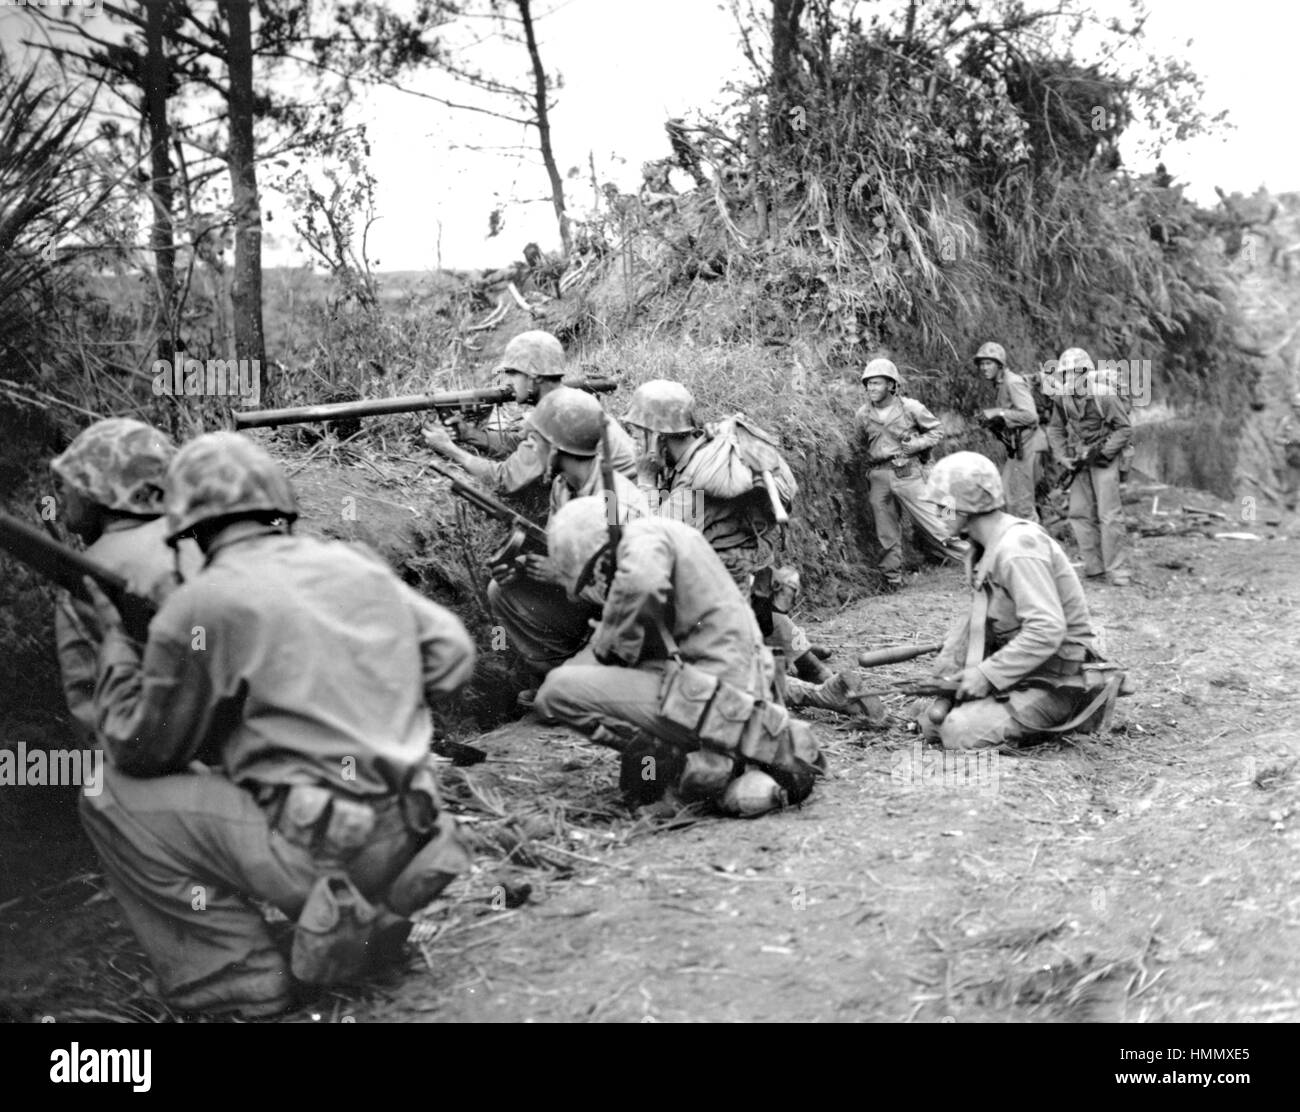 Okinawa 1945 Marine High Resolution Stock Photography and Images 